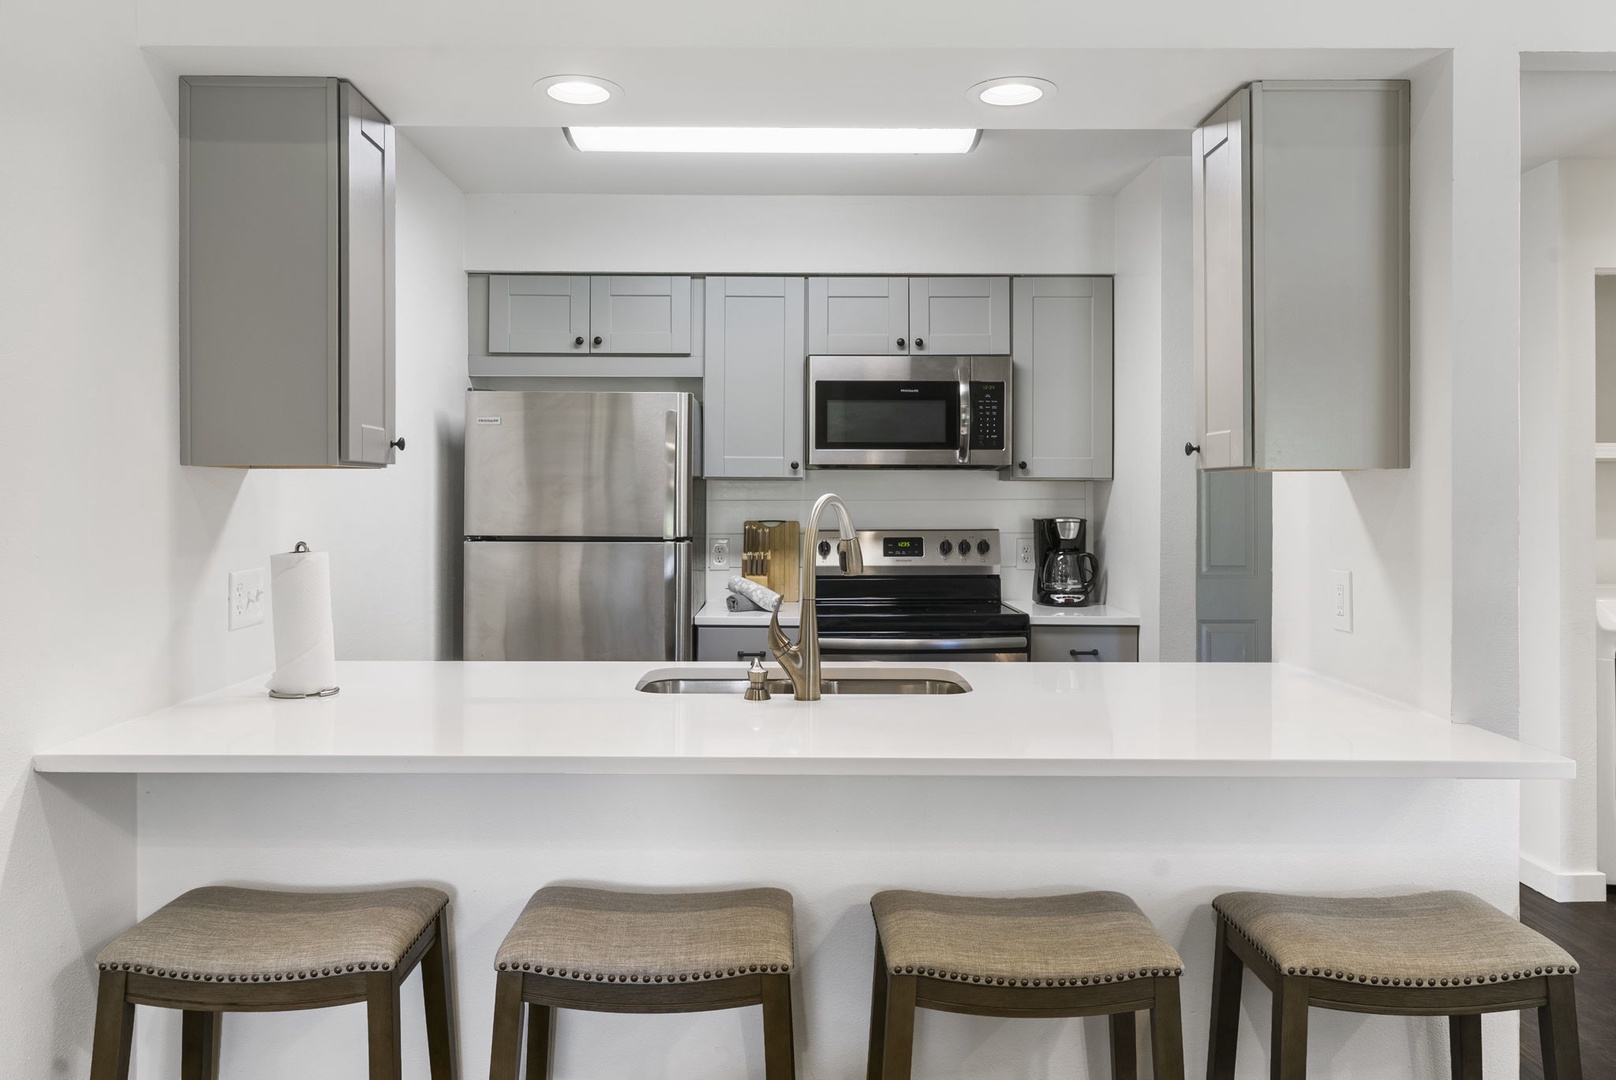 Sip morning coffee or grab a bite at the kitchen counter, offering seating for 4